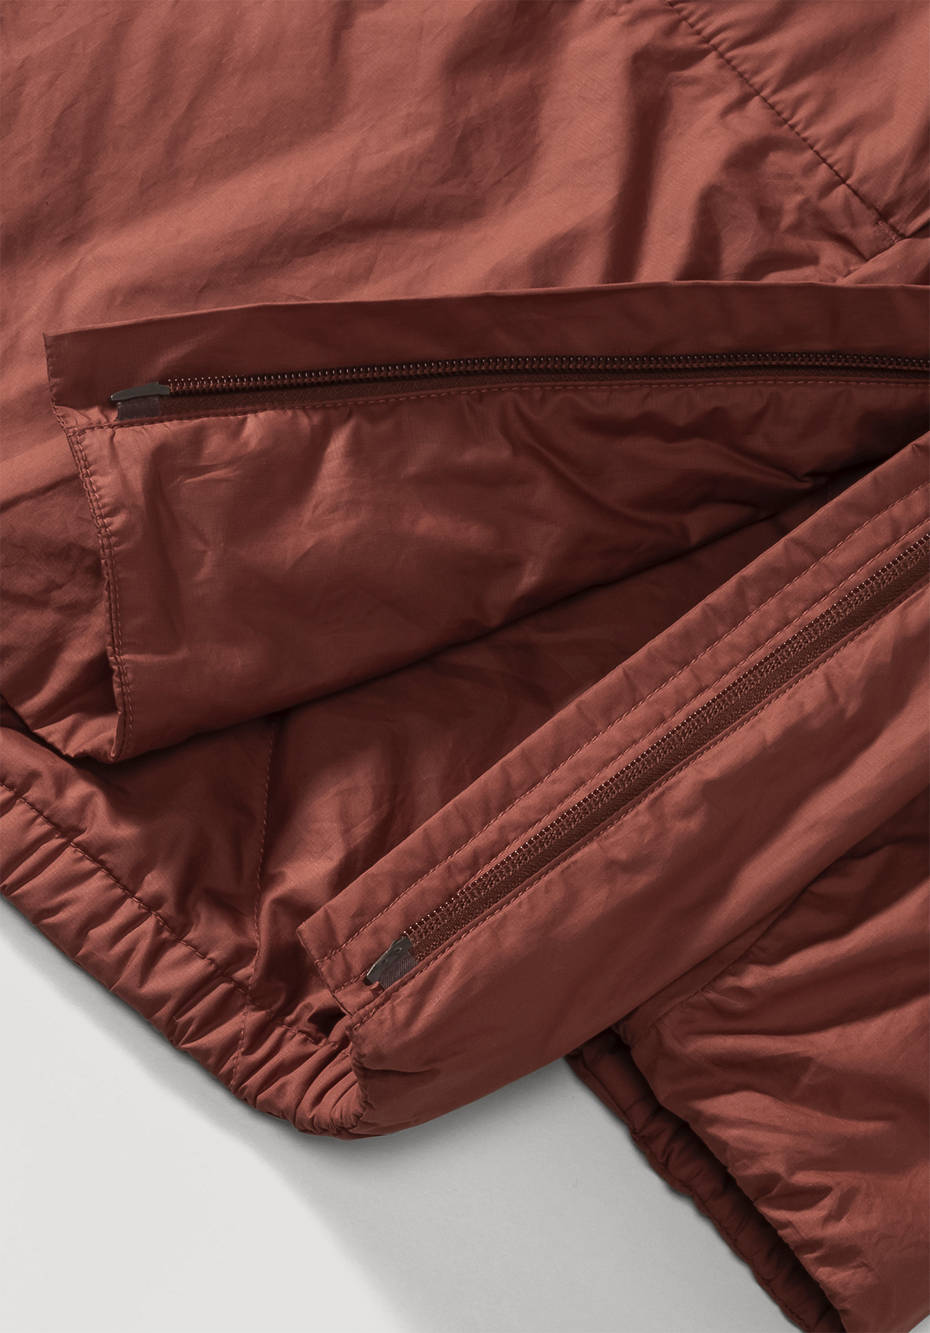 Anorak Nature Shell with Eco finish